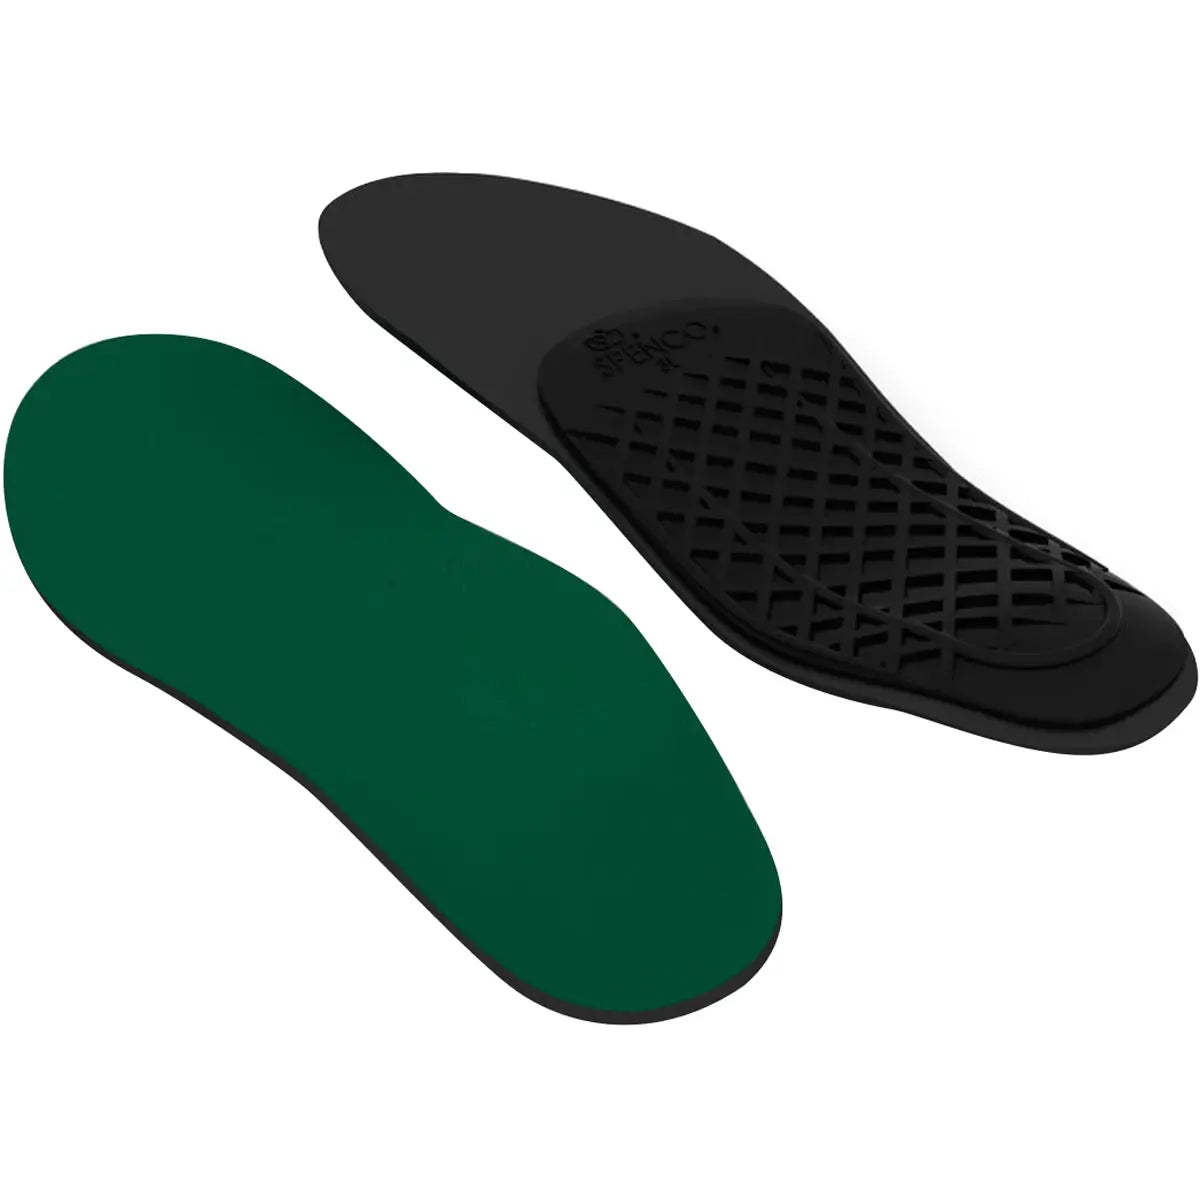 Spenco RX Full Length Orthotic Arch Support Shoe Insoles Spenco